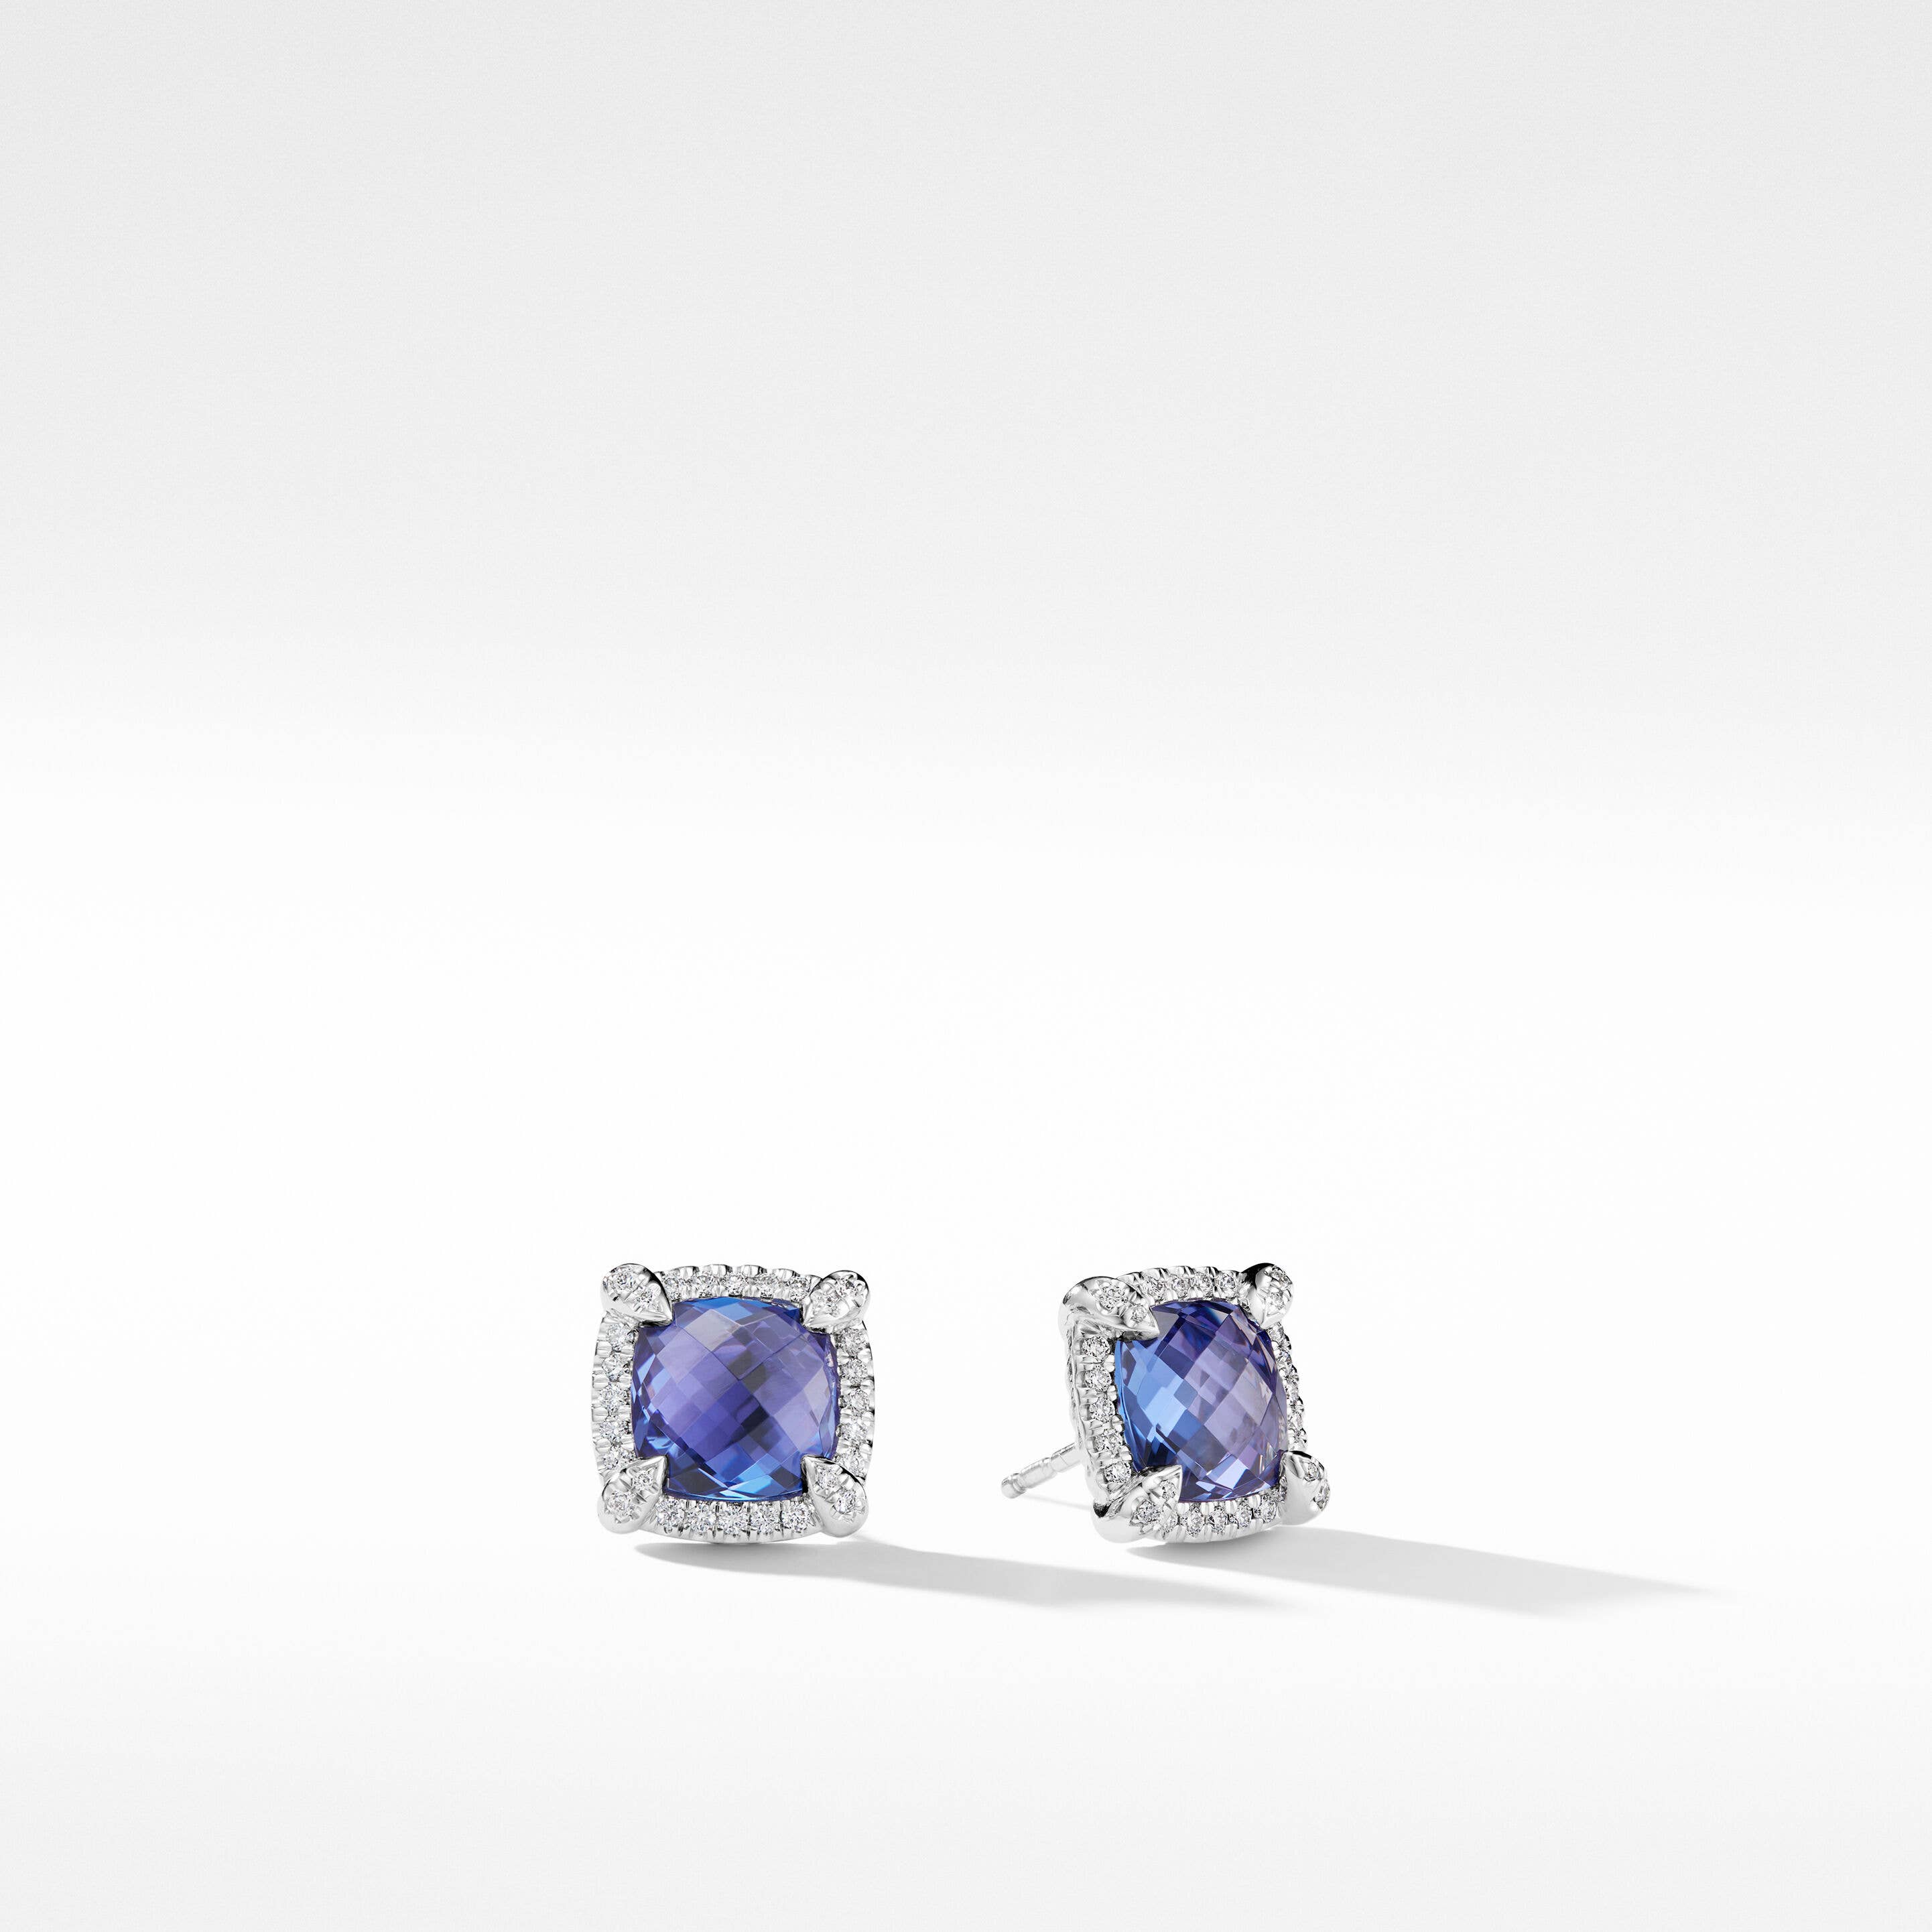 Chatelaine® Pavé Bezel Stud Earrings in 18K White Gold with Tanzanite and Diamonds